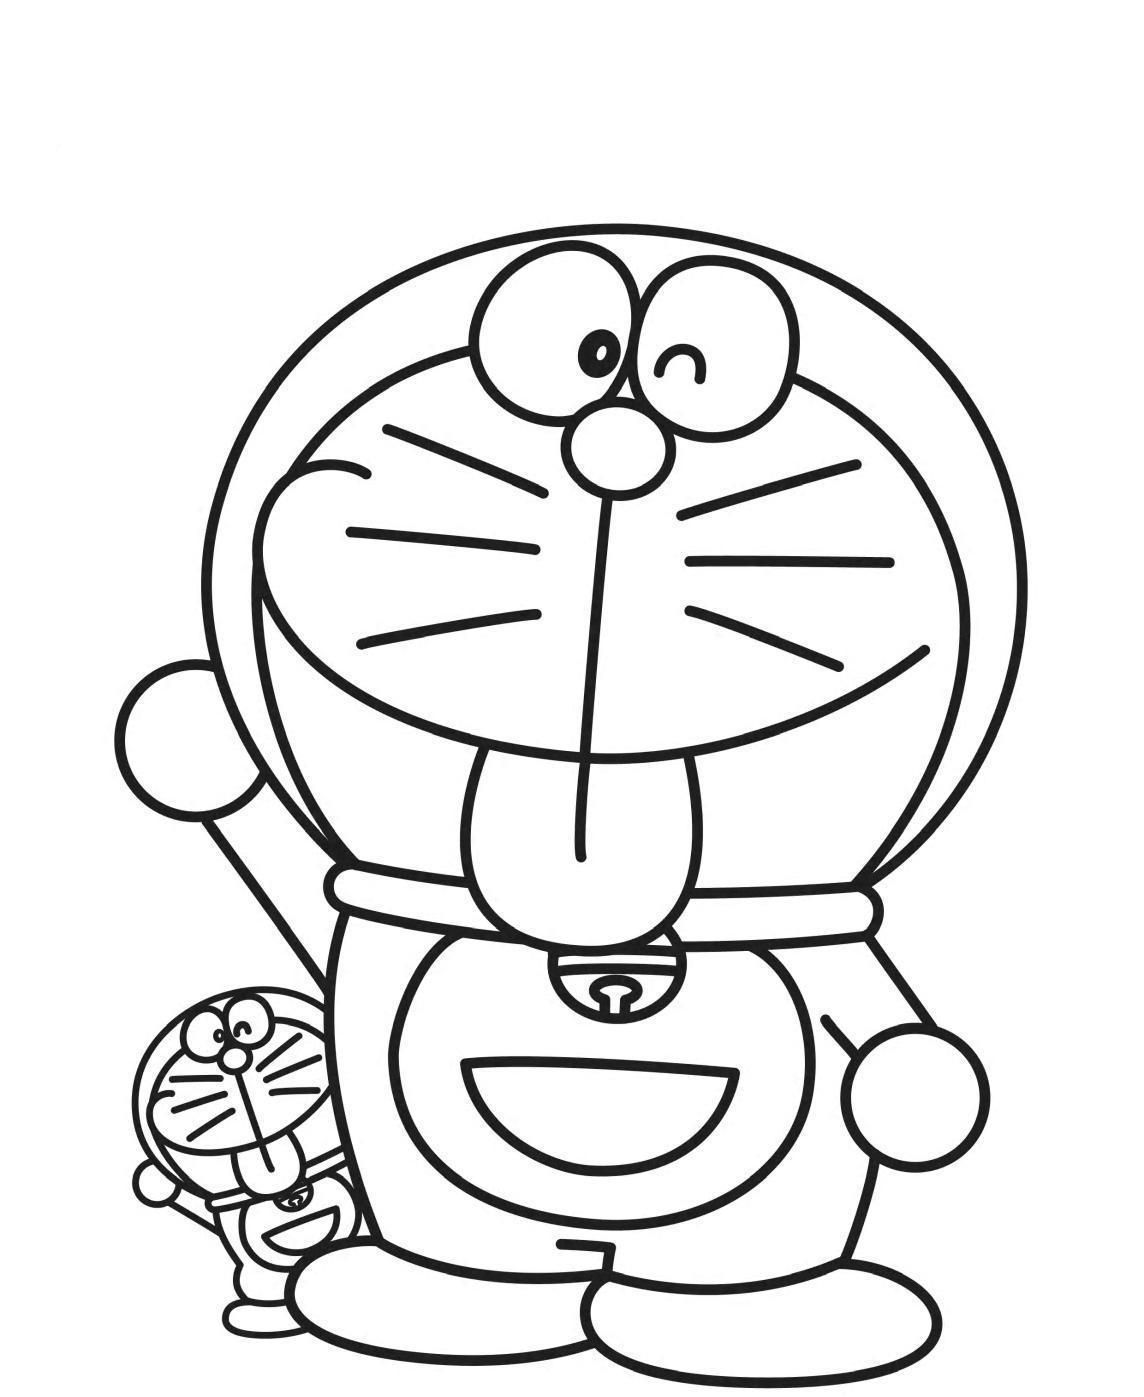 Doraemon Coloring Pages Best Coloring Pages For Kids